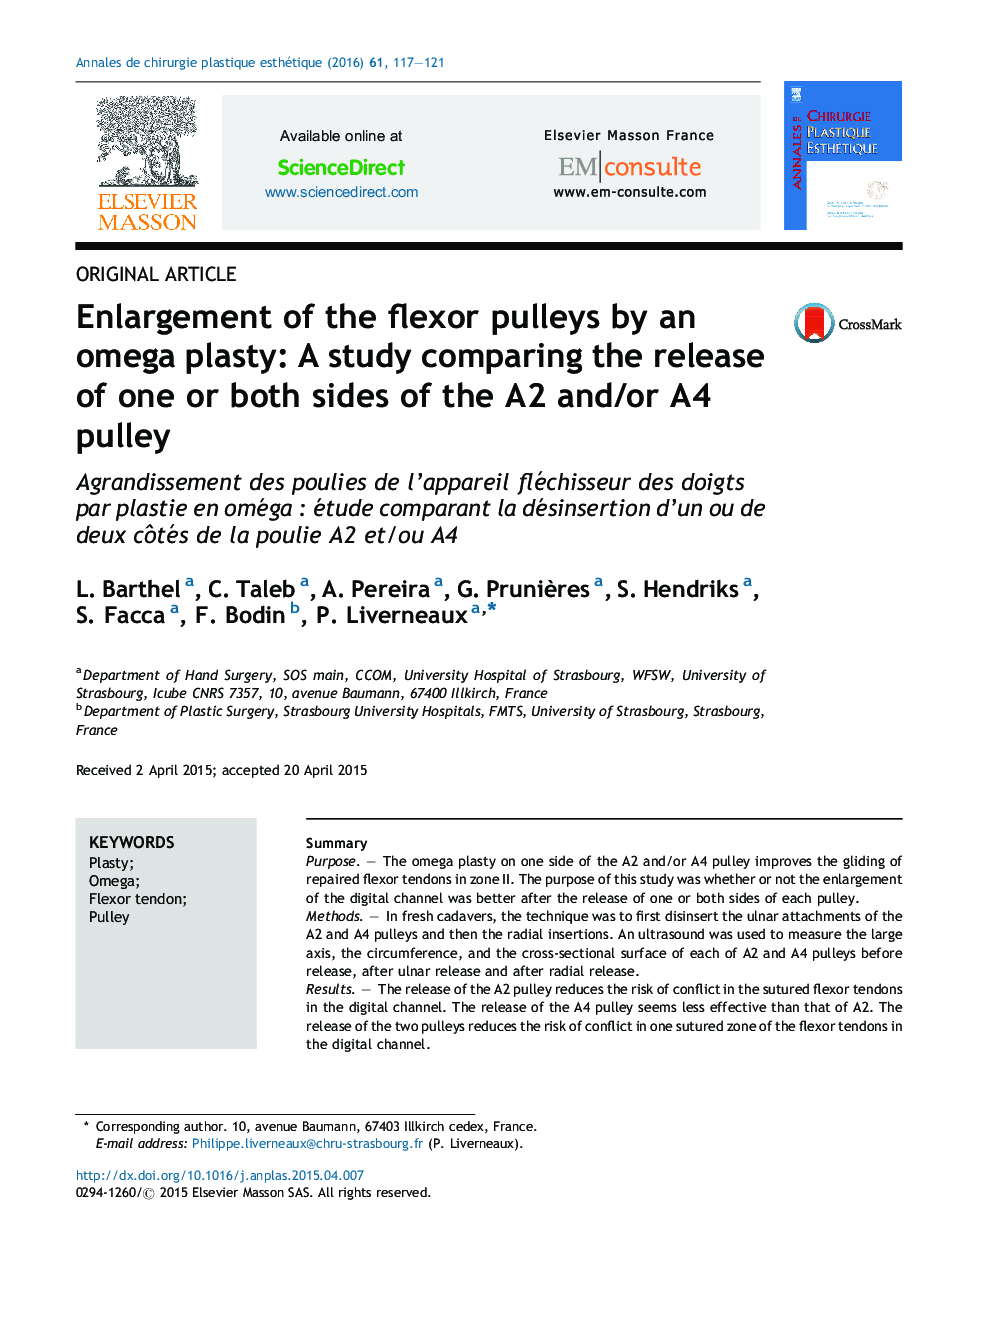 Enlargement of the flexor pulleys by an omega plasty: A study comparing the release of one or both sides of the A2 and/or A4 pulley